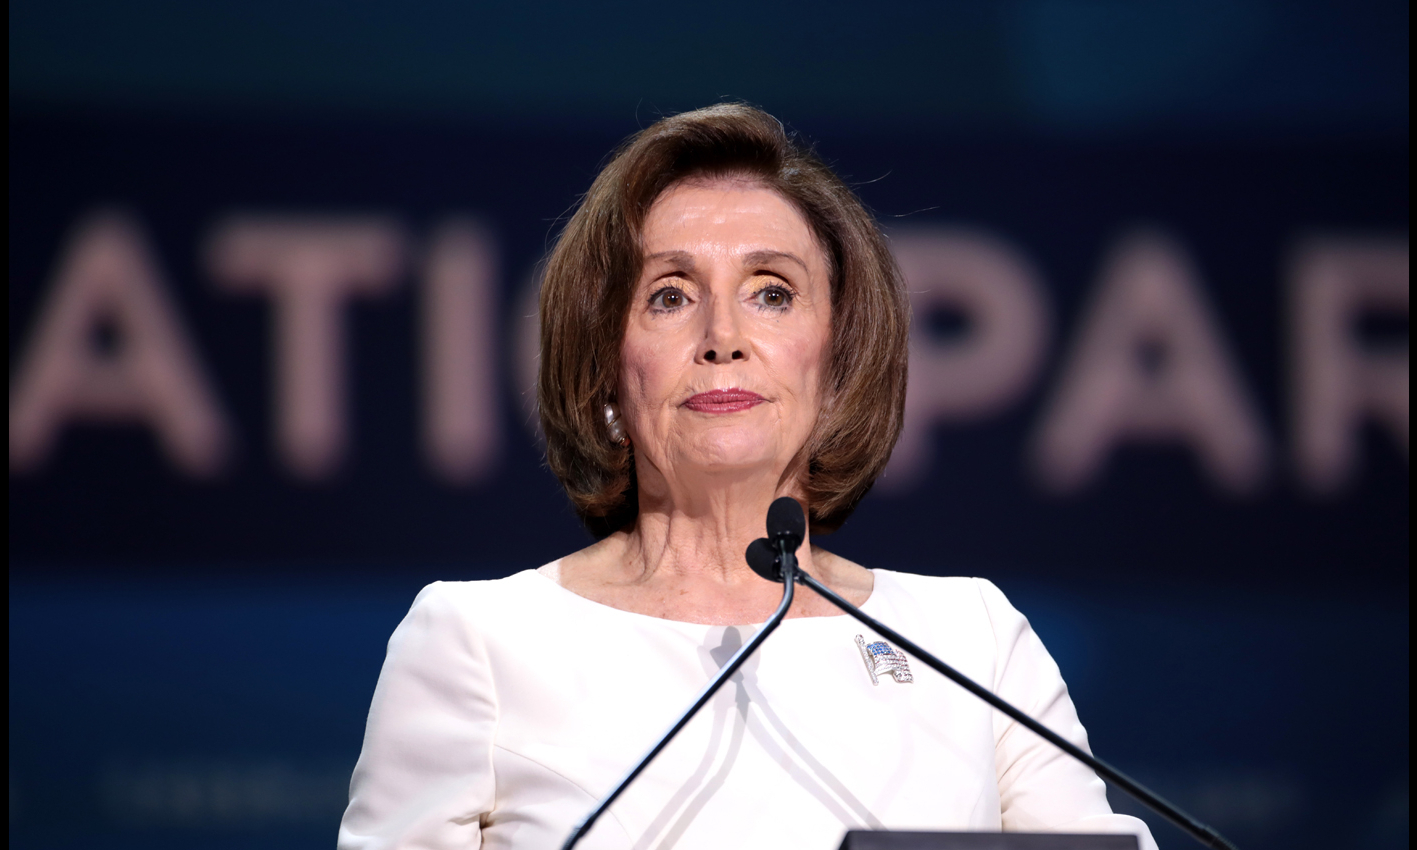 United States House Speaker Nancy Pelosi has been arrested.